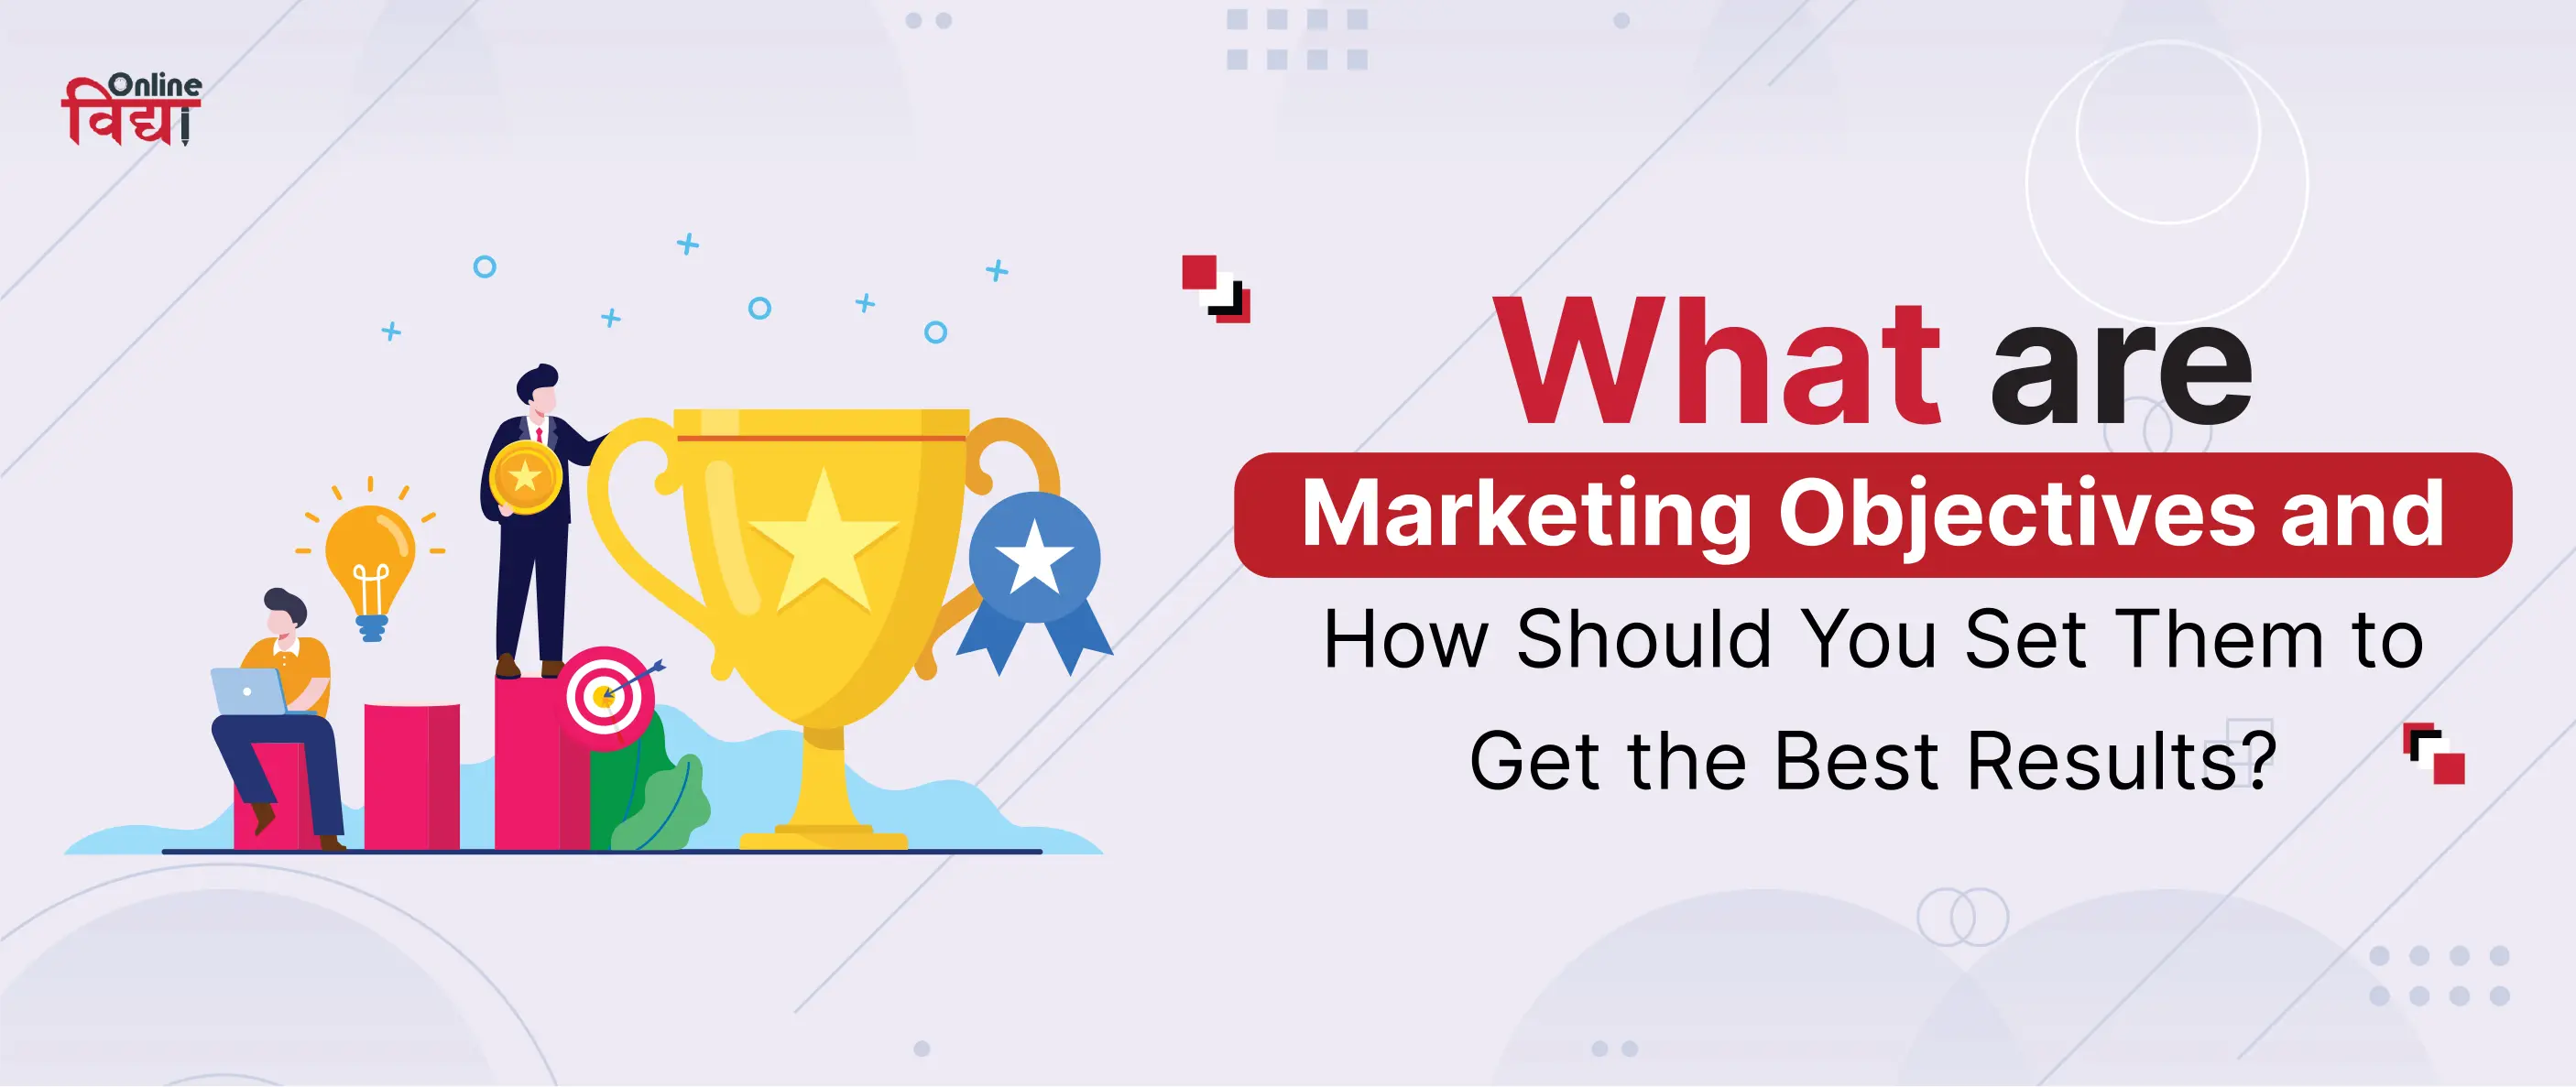 What are Marketing Objectives and How Should You Set Them to Get the Best Results?